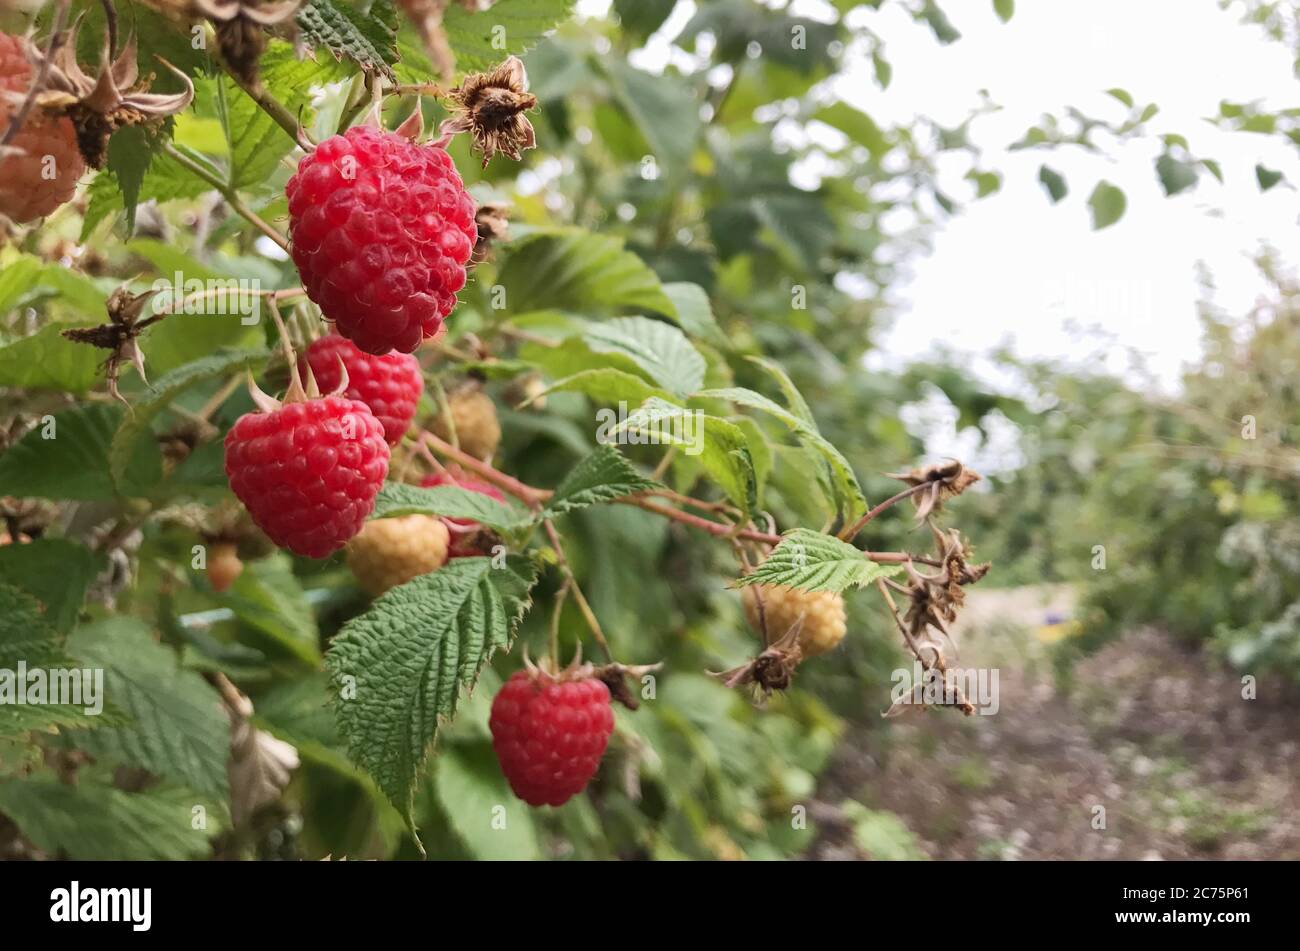 The raspberry is the edible fruit of a multitude of plant species in the genus Rubus of the rose family. Stock Photo